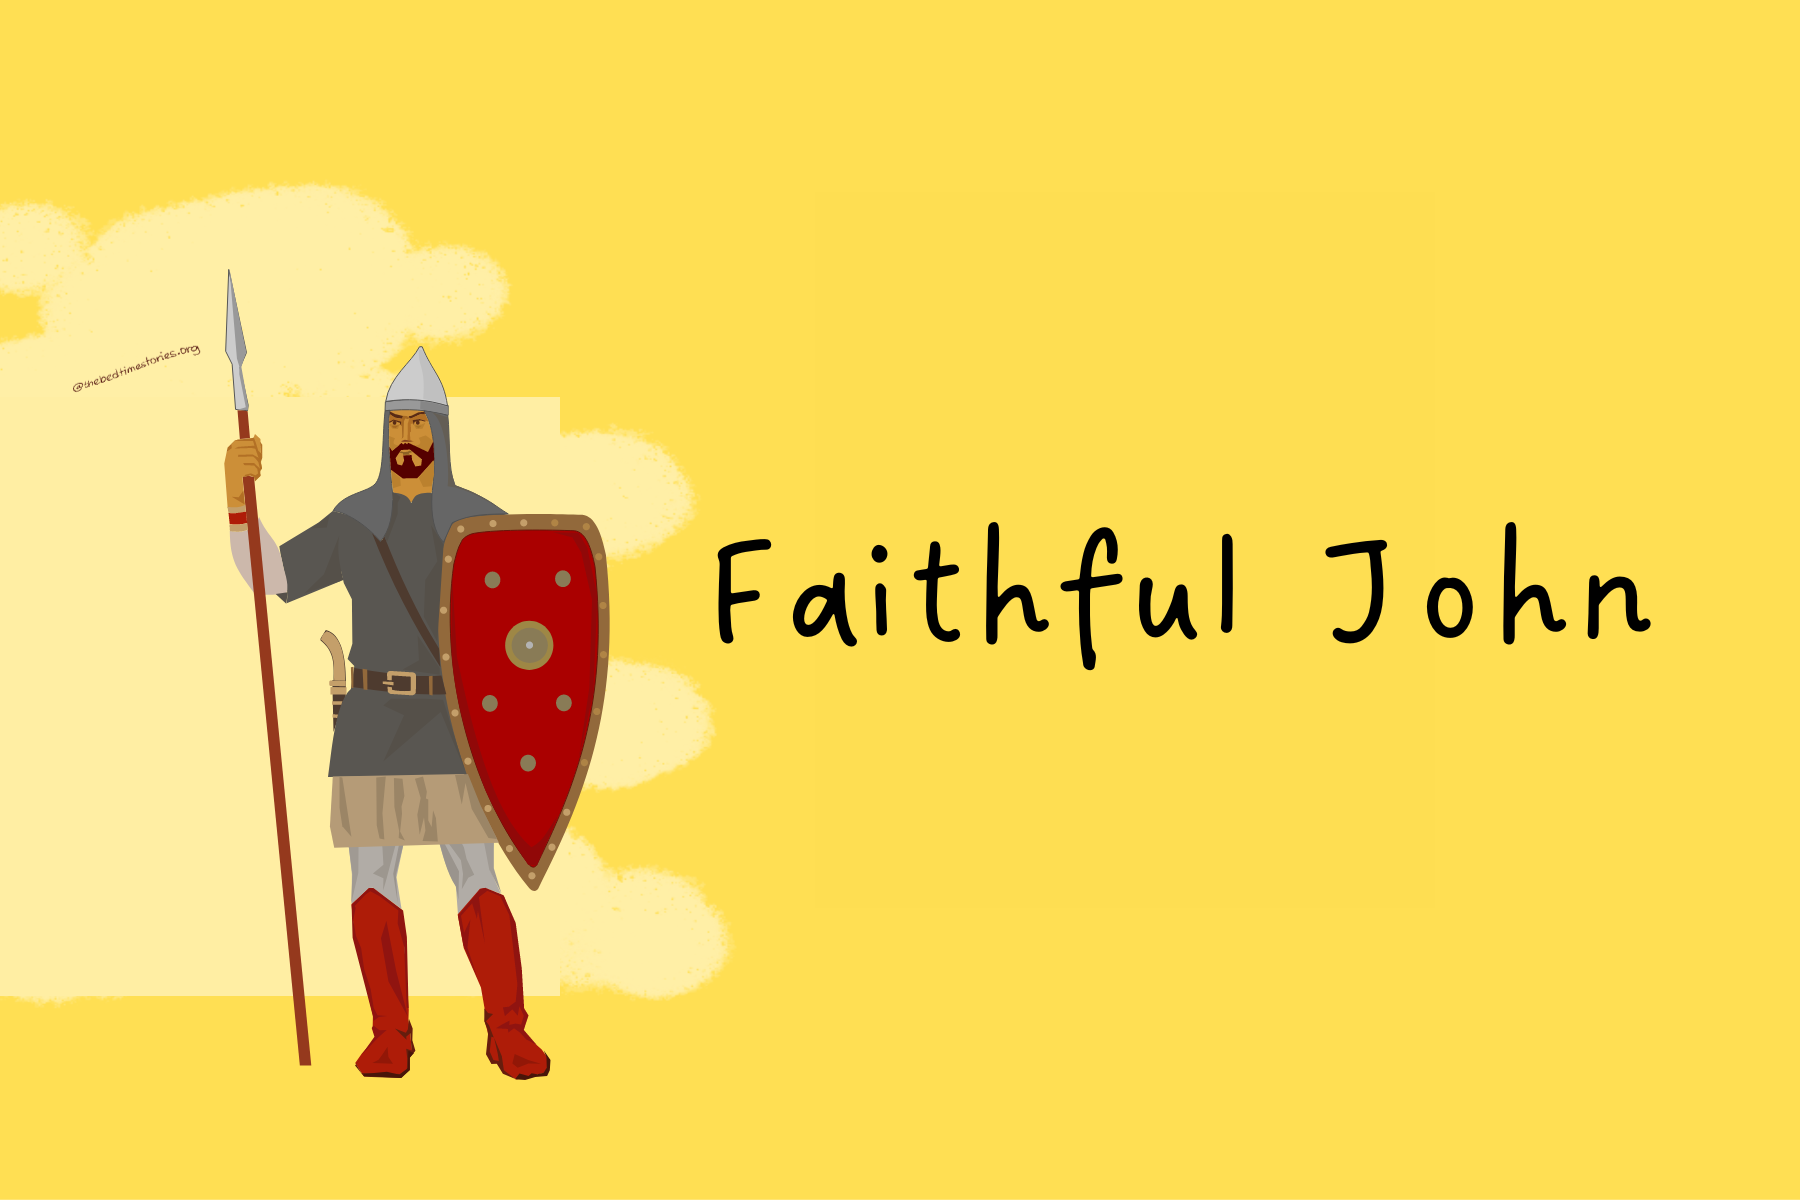 Faithful John: Best Of Top 10 ‘King and Queen’ Stories For Kids